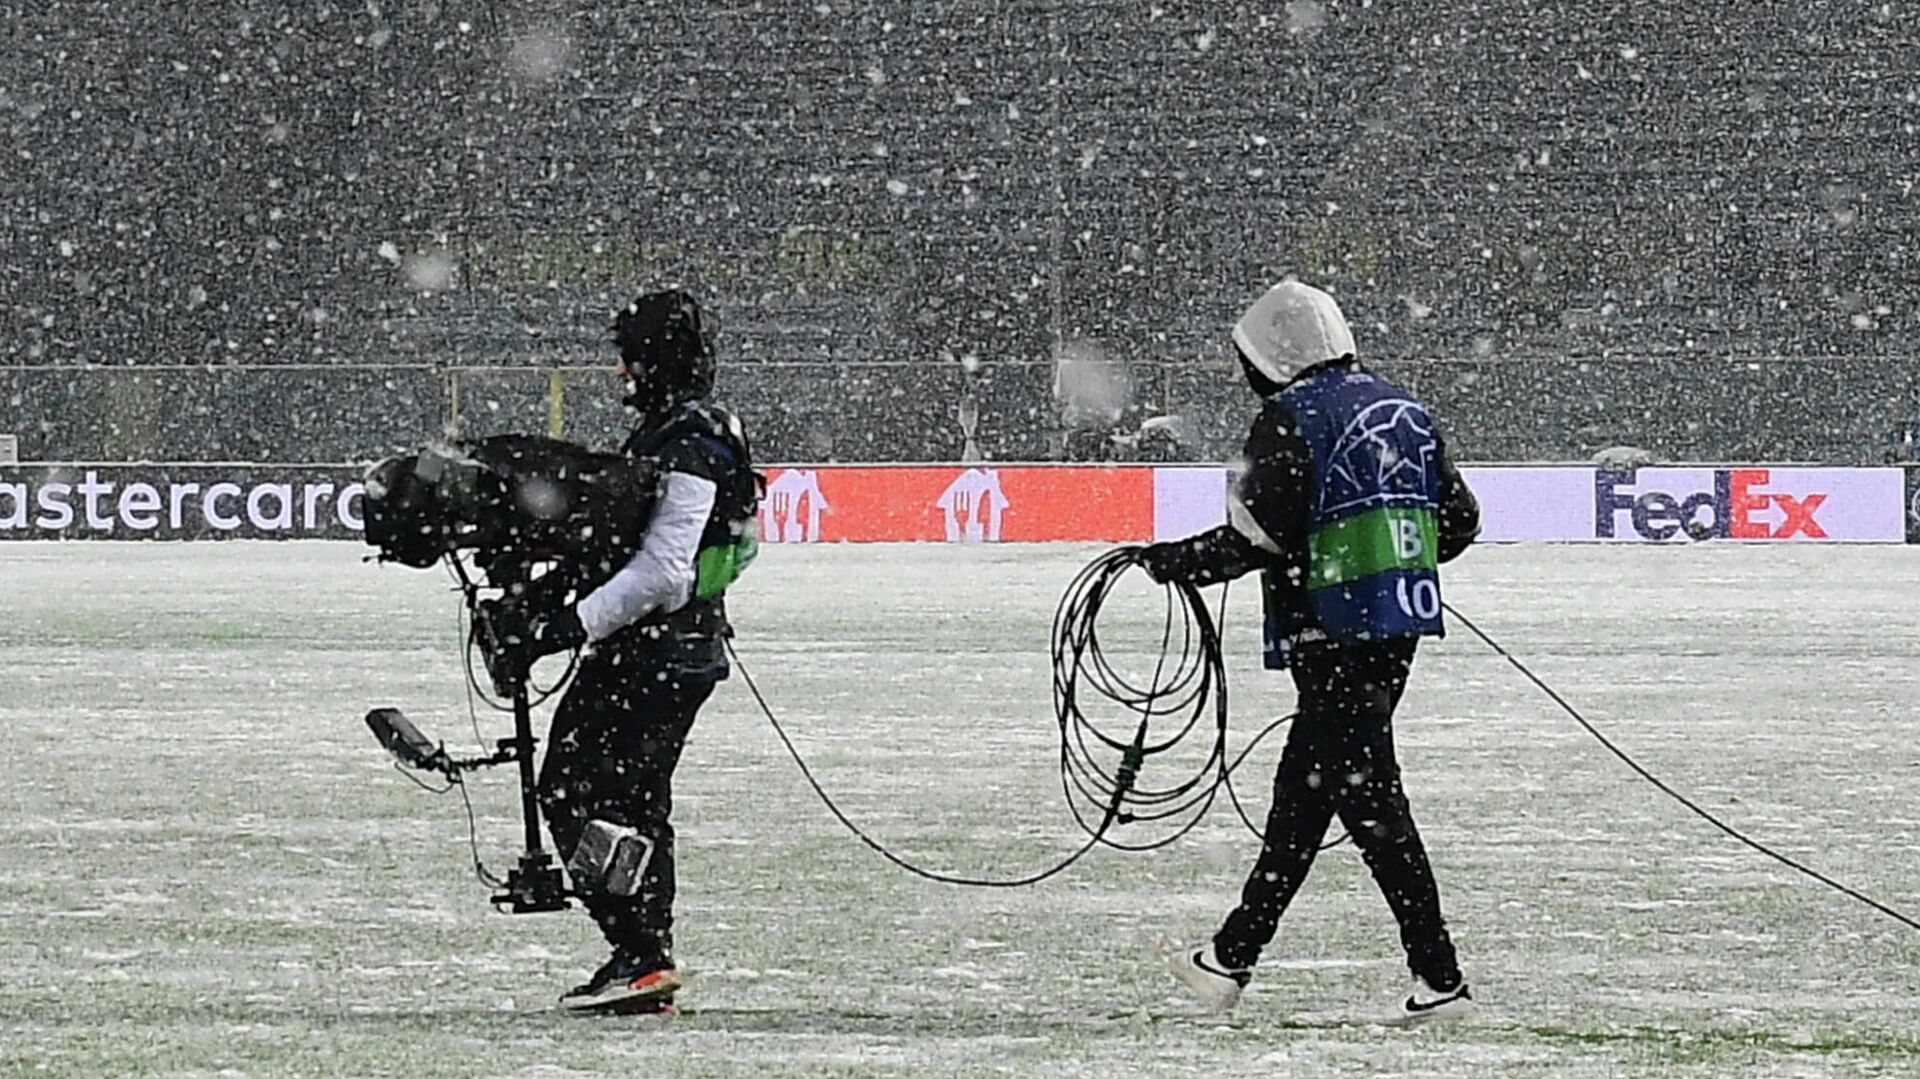 A screen displays the match has been postponed until tomorrow at a time to be determined after UEFA officials decided to postpone due to heavy snowfalls the Champions League Group F football match between Atalanta and Villarreal on December 8, 2021 at the Atleti Azzurri d'Italia stadium in Bergamo. (Photo by Isabella BONOTTO / AFP) - РИА Новости, 1920, 09.12.2021